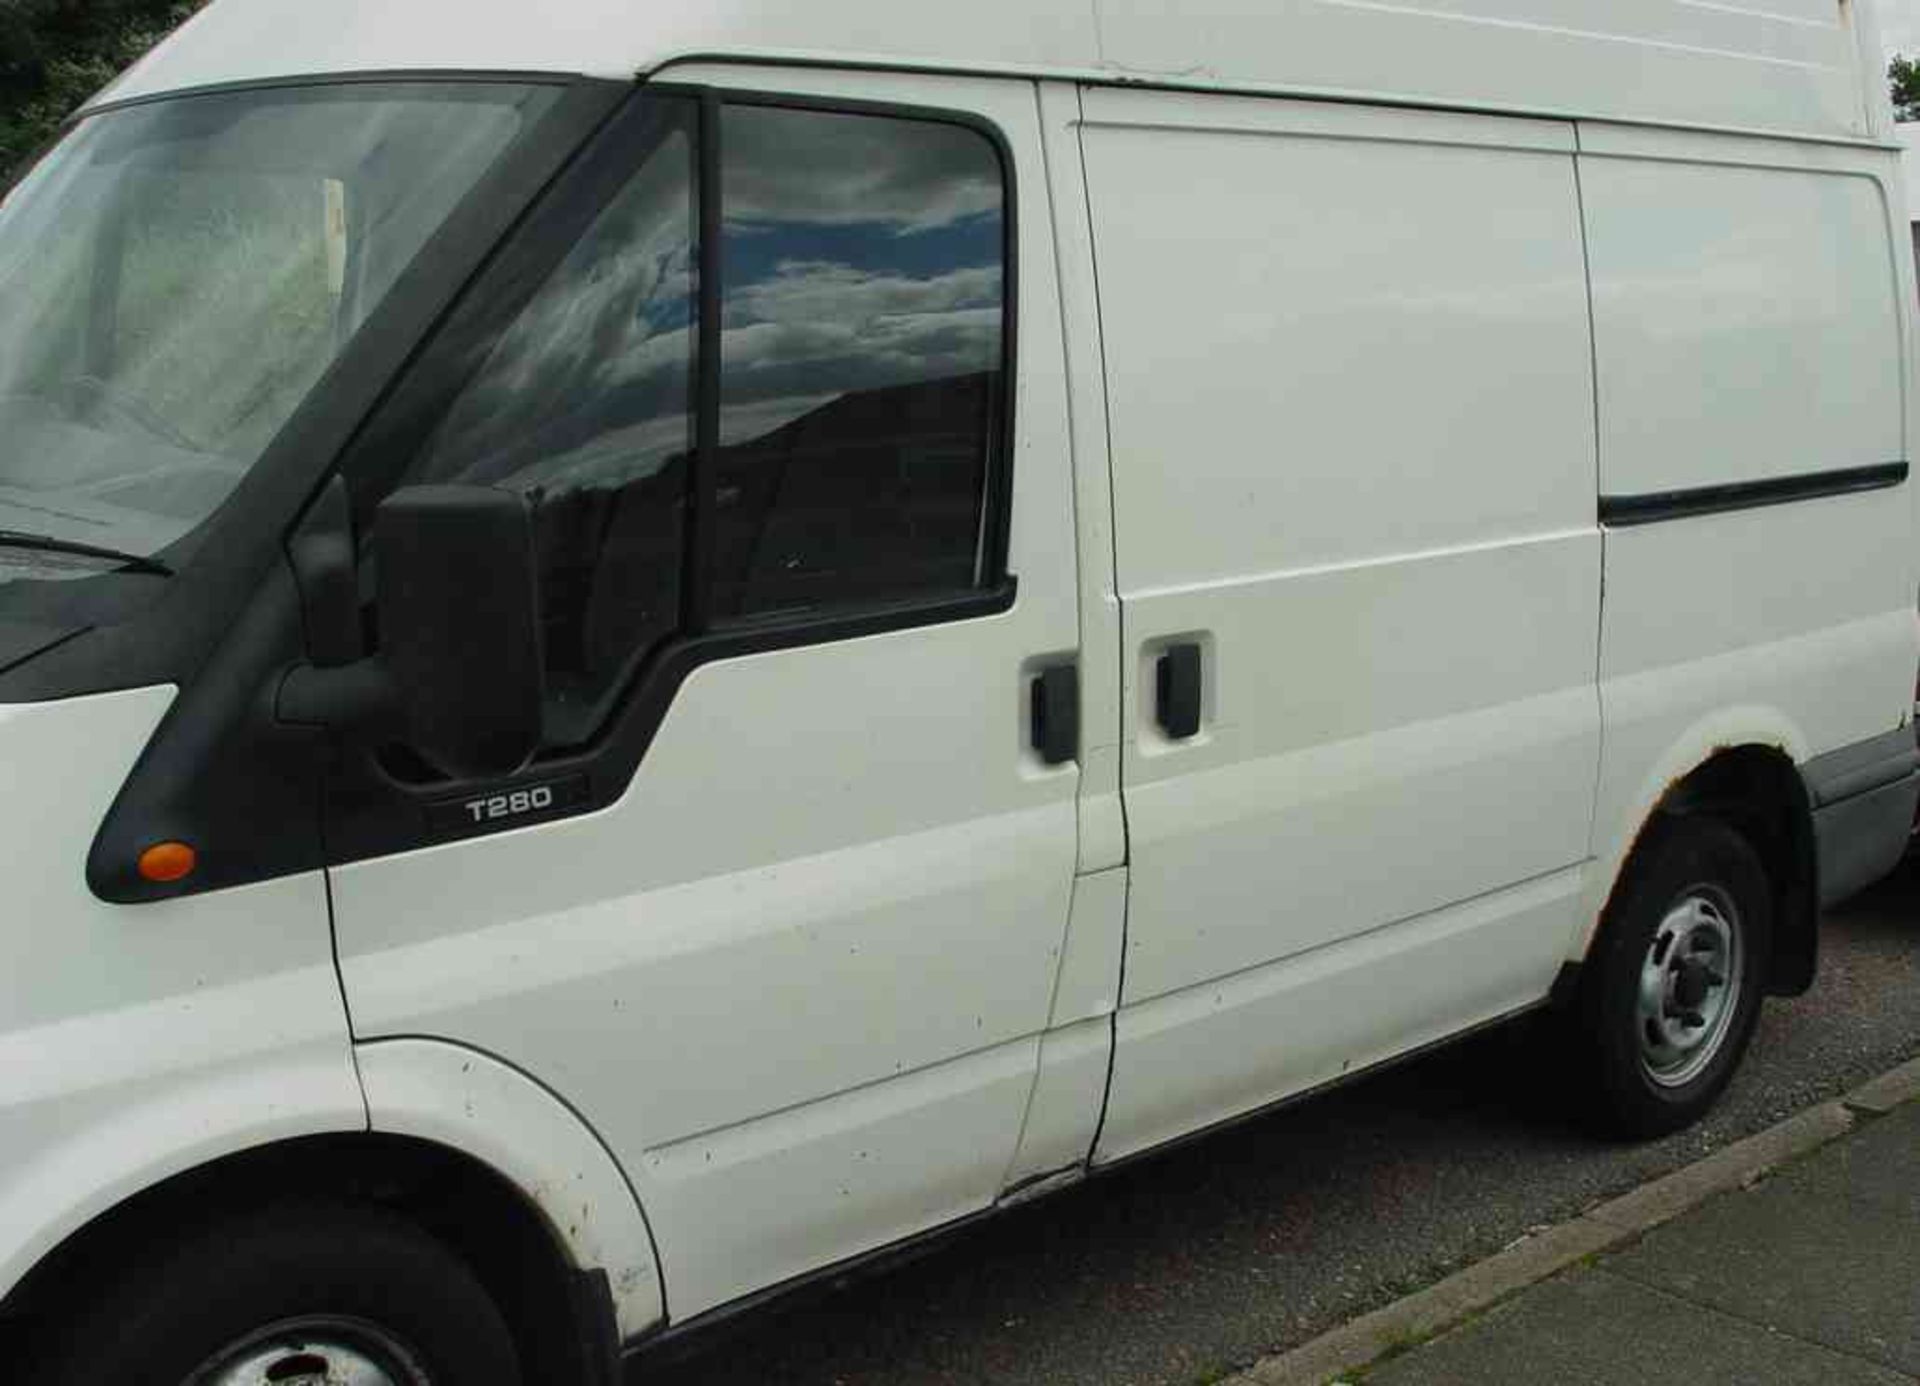 TRANSIT VAN 2003 - MJ03 MBU - 1988CC DIESEL MOT JUNE 2016 DRIVES VERY WELL DOES WANT A GOOD CLEANUP, - Image 2 of 7